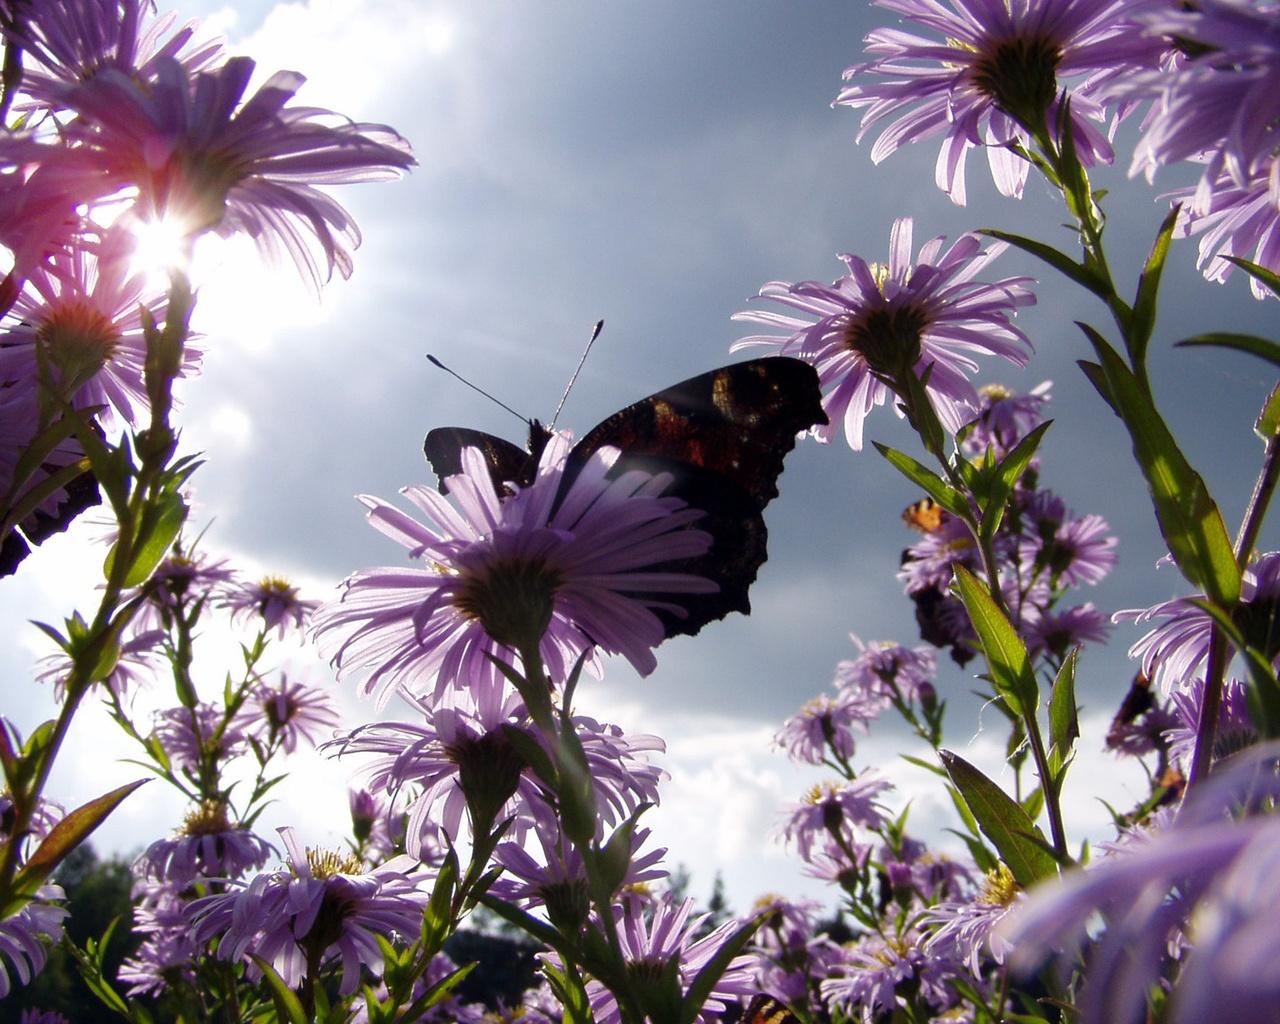 Butterfly & Daisies Wallpaper in jpg format for free download